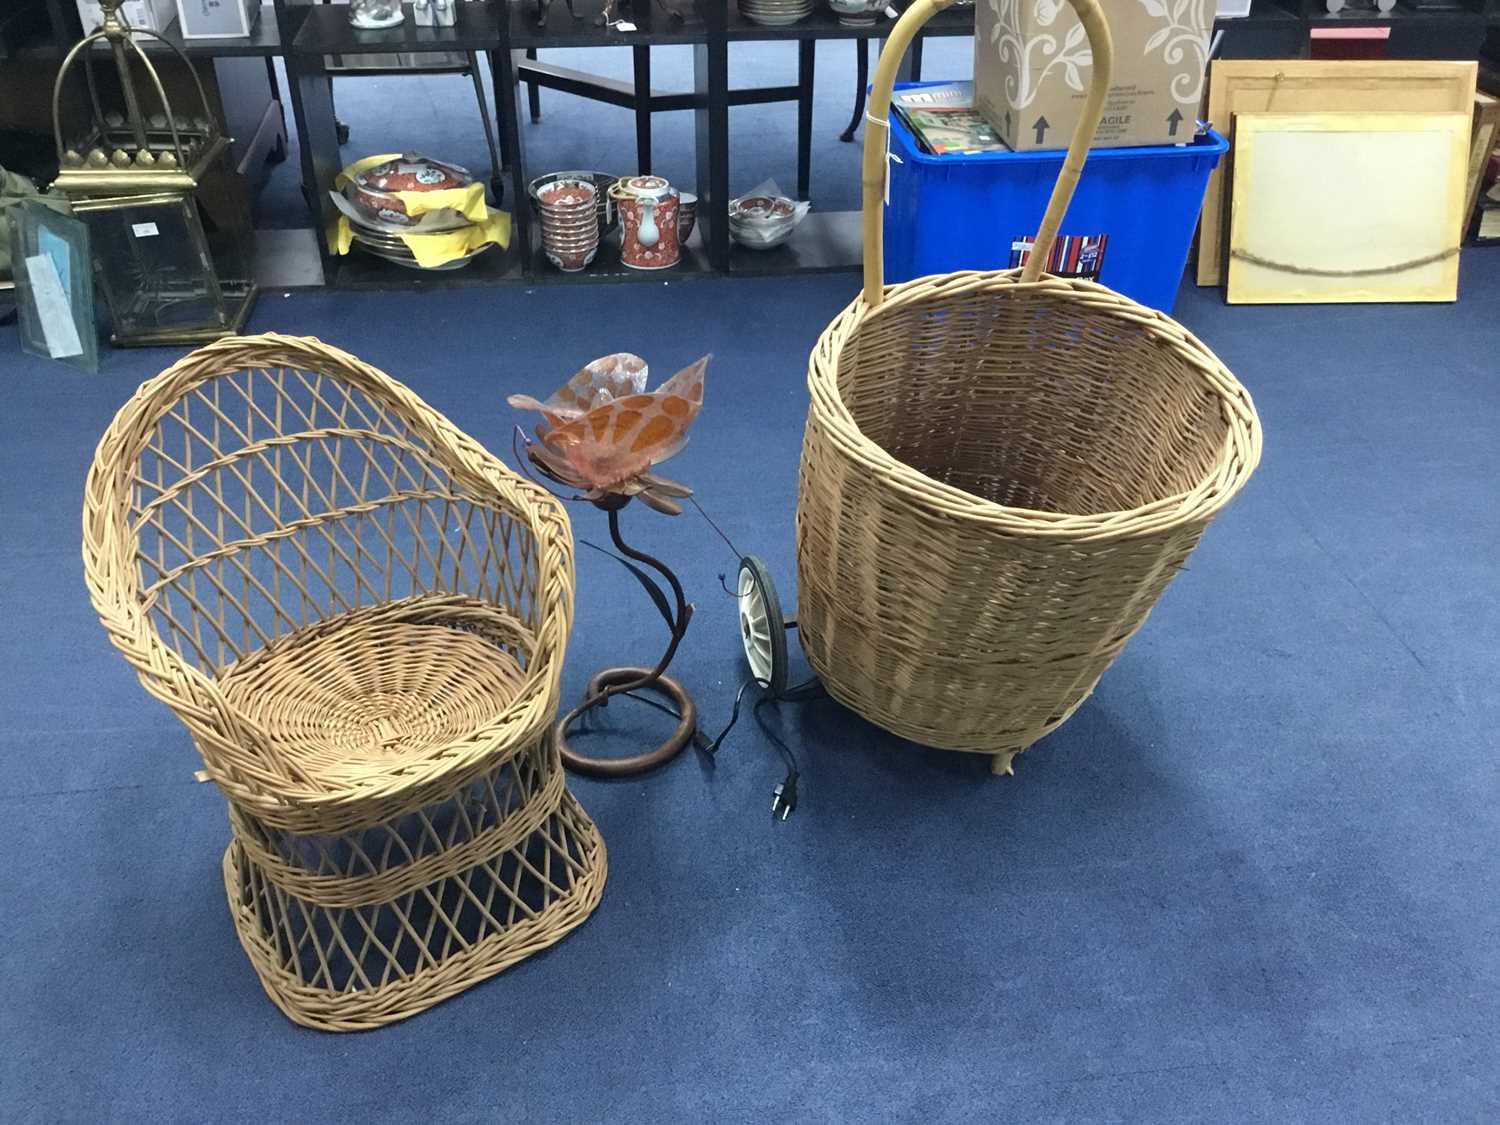 Lot 91 - A WICKER BASKET, ALONG WITH A CHAIR AND A LAMP